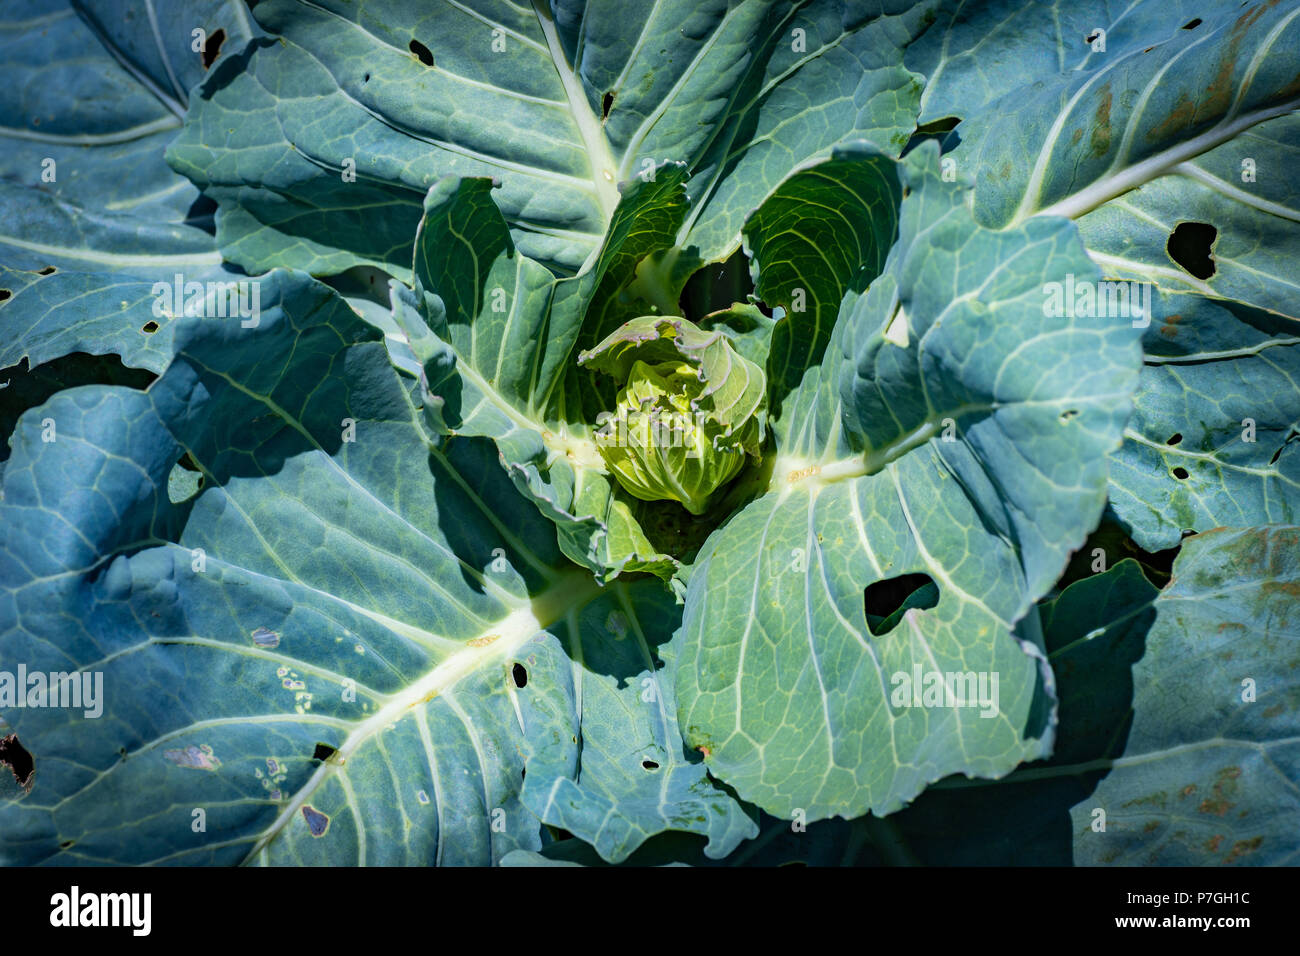 Close up on young cabbage vegetable growing in the field outdoors with many holes in its leaves from insects. Stock Photo